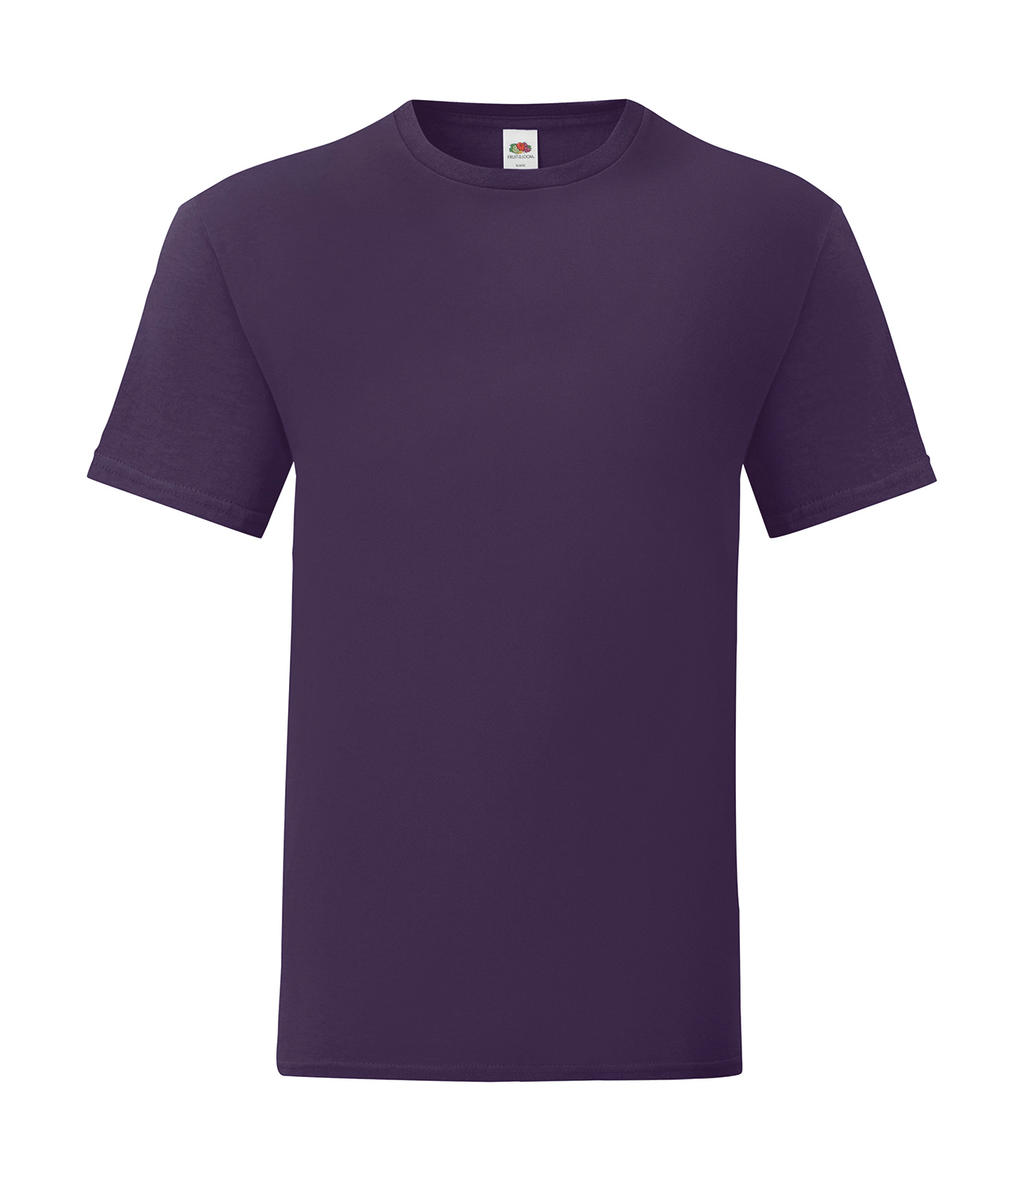  Girls Iconic 150 T in Farbe Purple